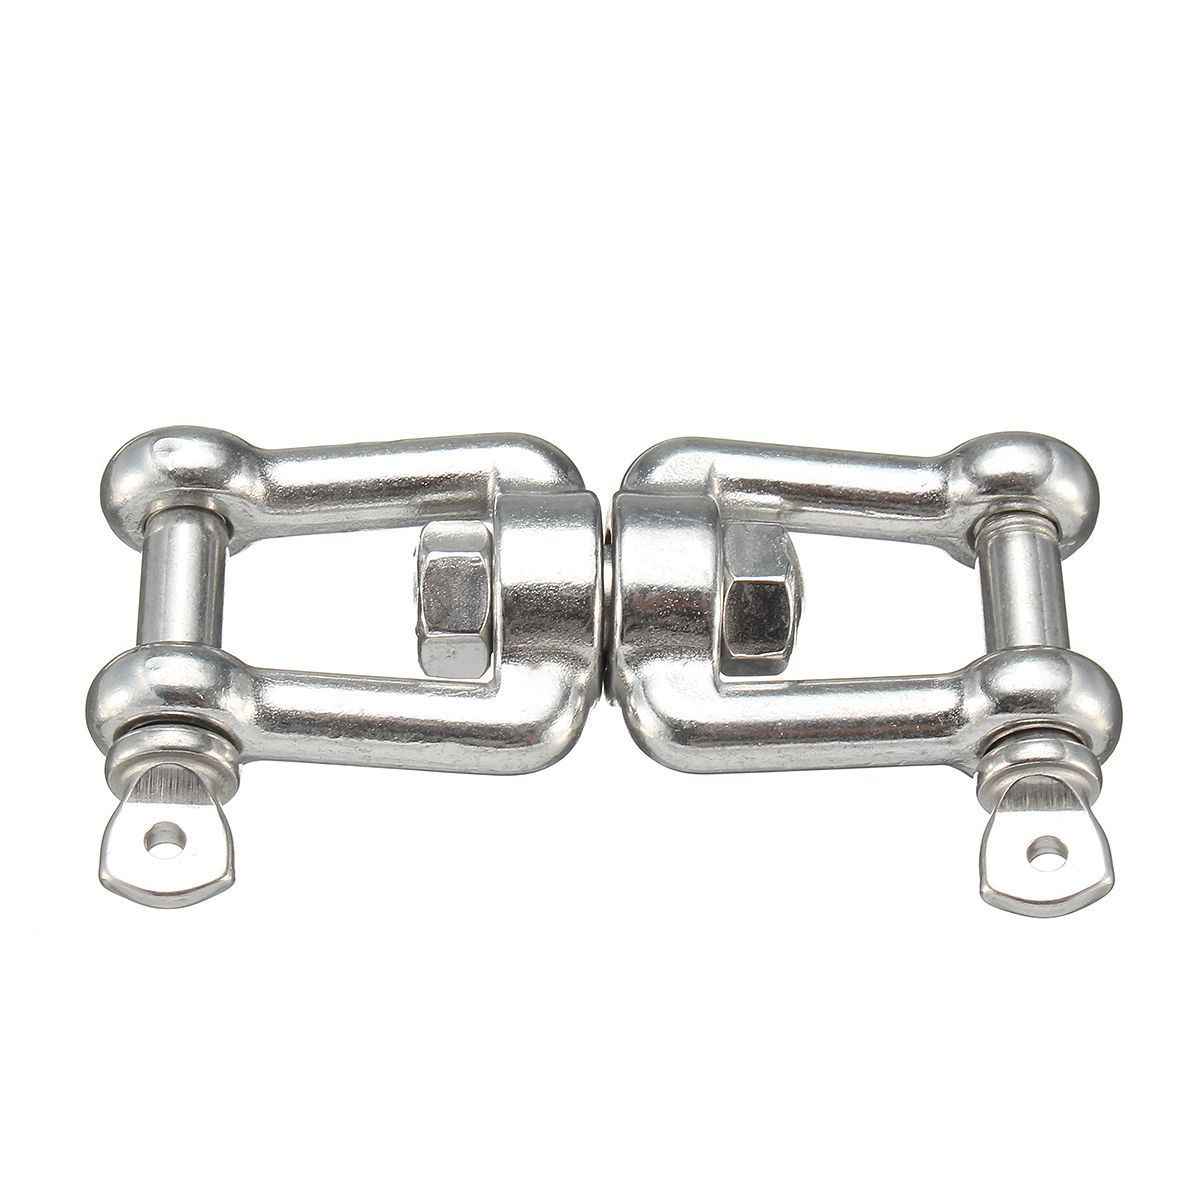 8mm-Swivel-Connector-Shackle-Hook-316-Stainless-Steel-for-Boat-Jaw-Sea-Anchor-Chain-1188376